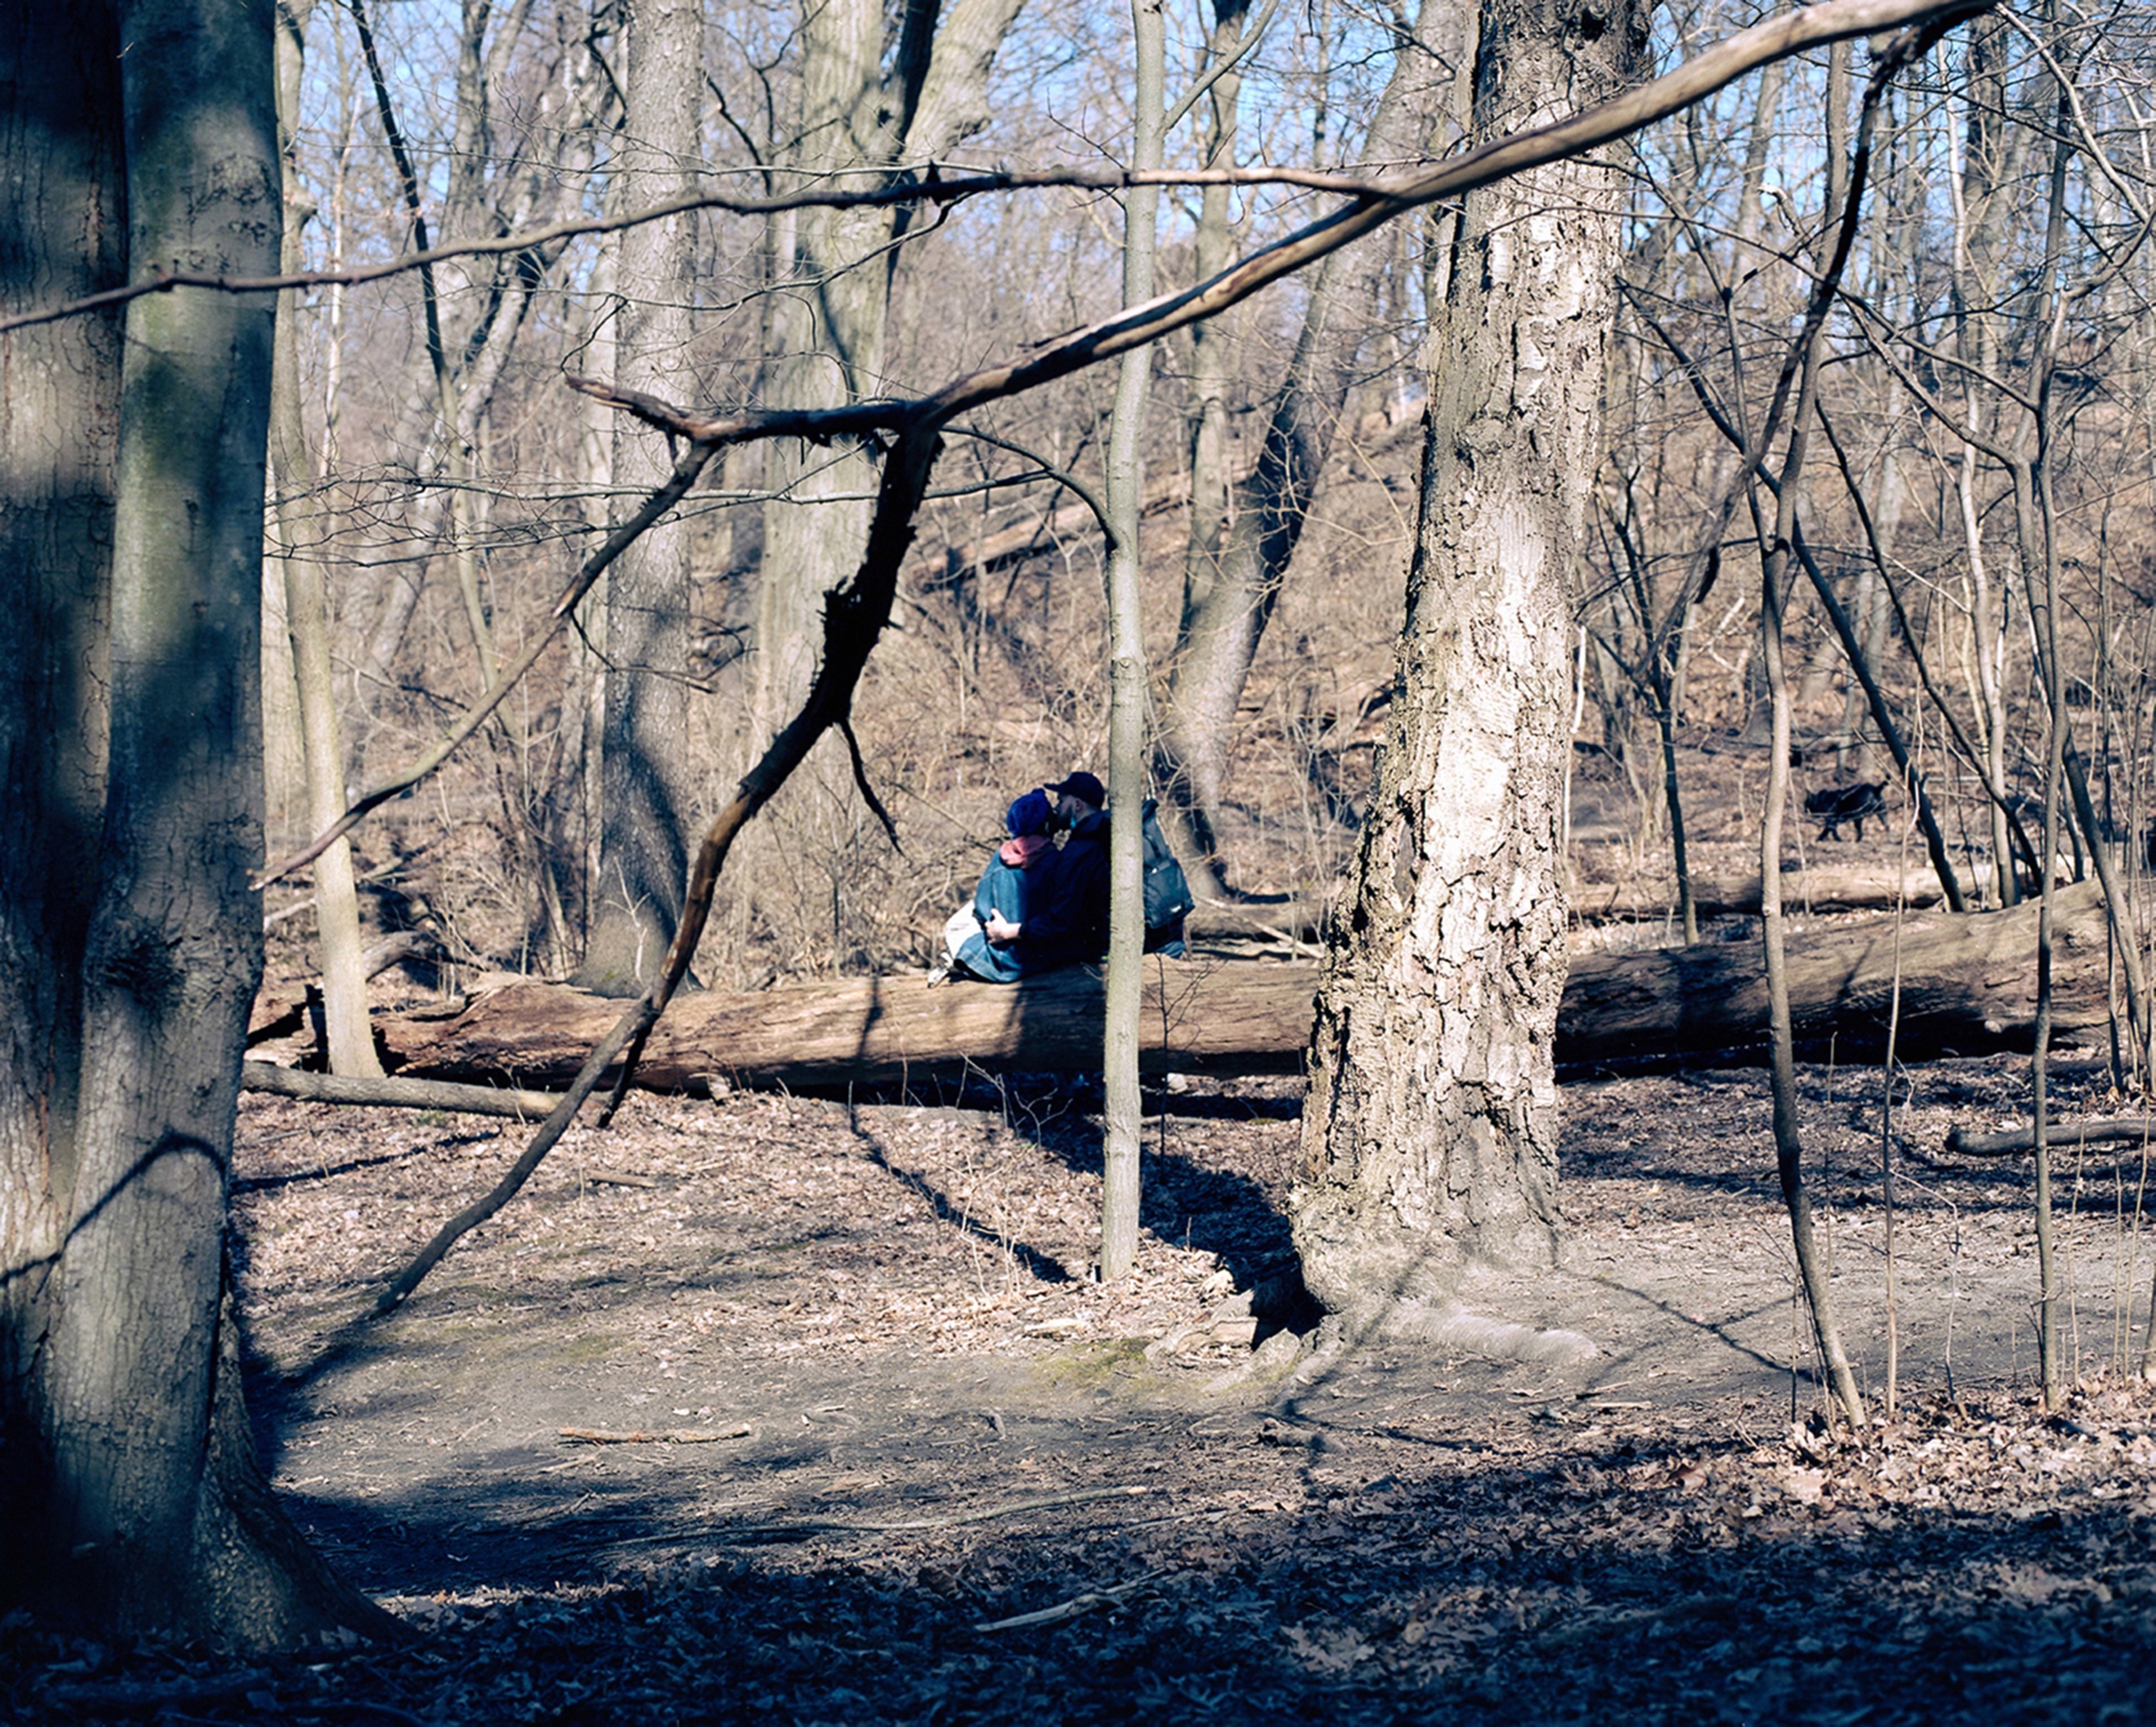     Joseph Kennel, Annotations in High Park 2, 2021

